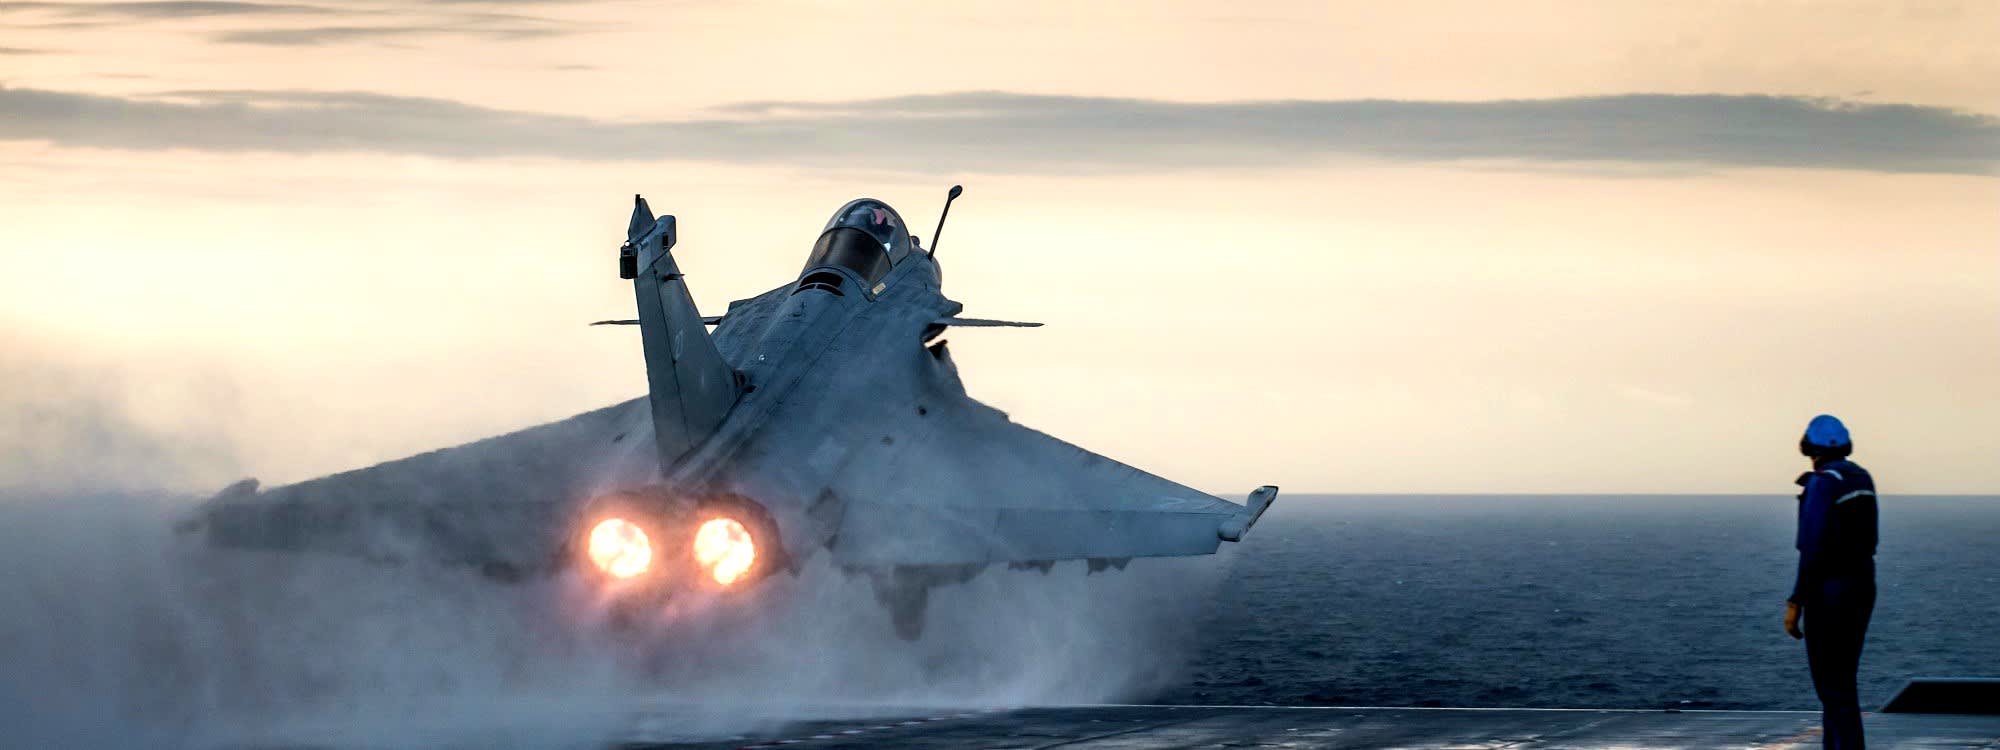 Rafale M on Charles de Gaulle aircraft carrier